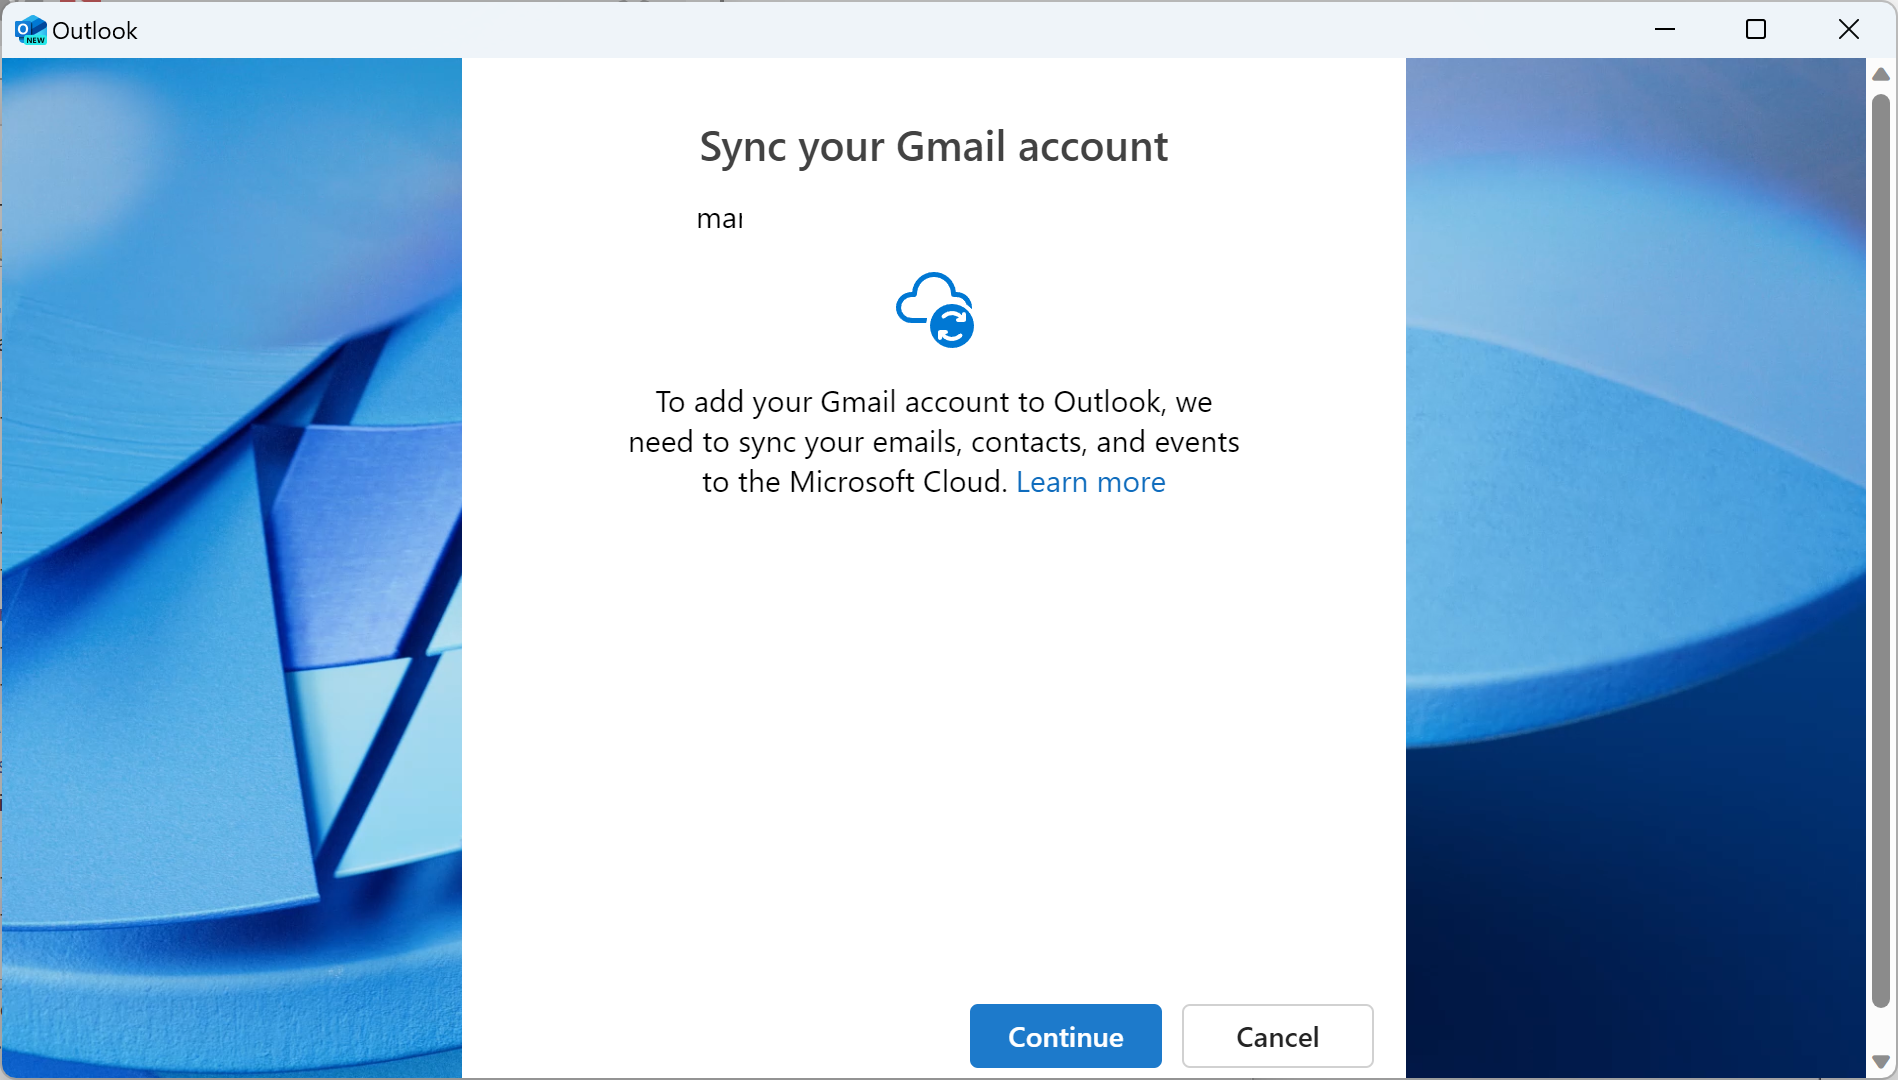 How To Add A New Email To Your Hotmail Account - gHacks Tech News